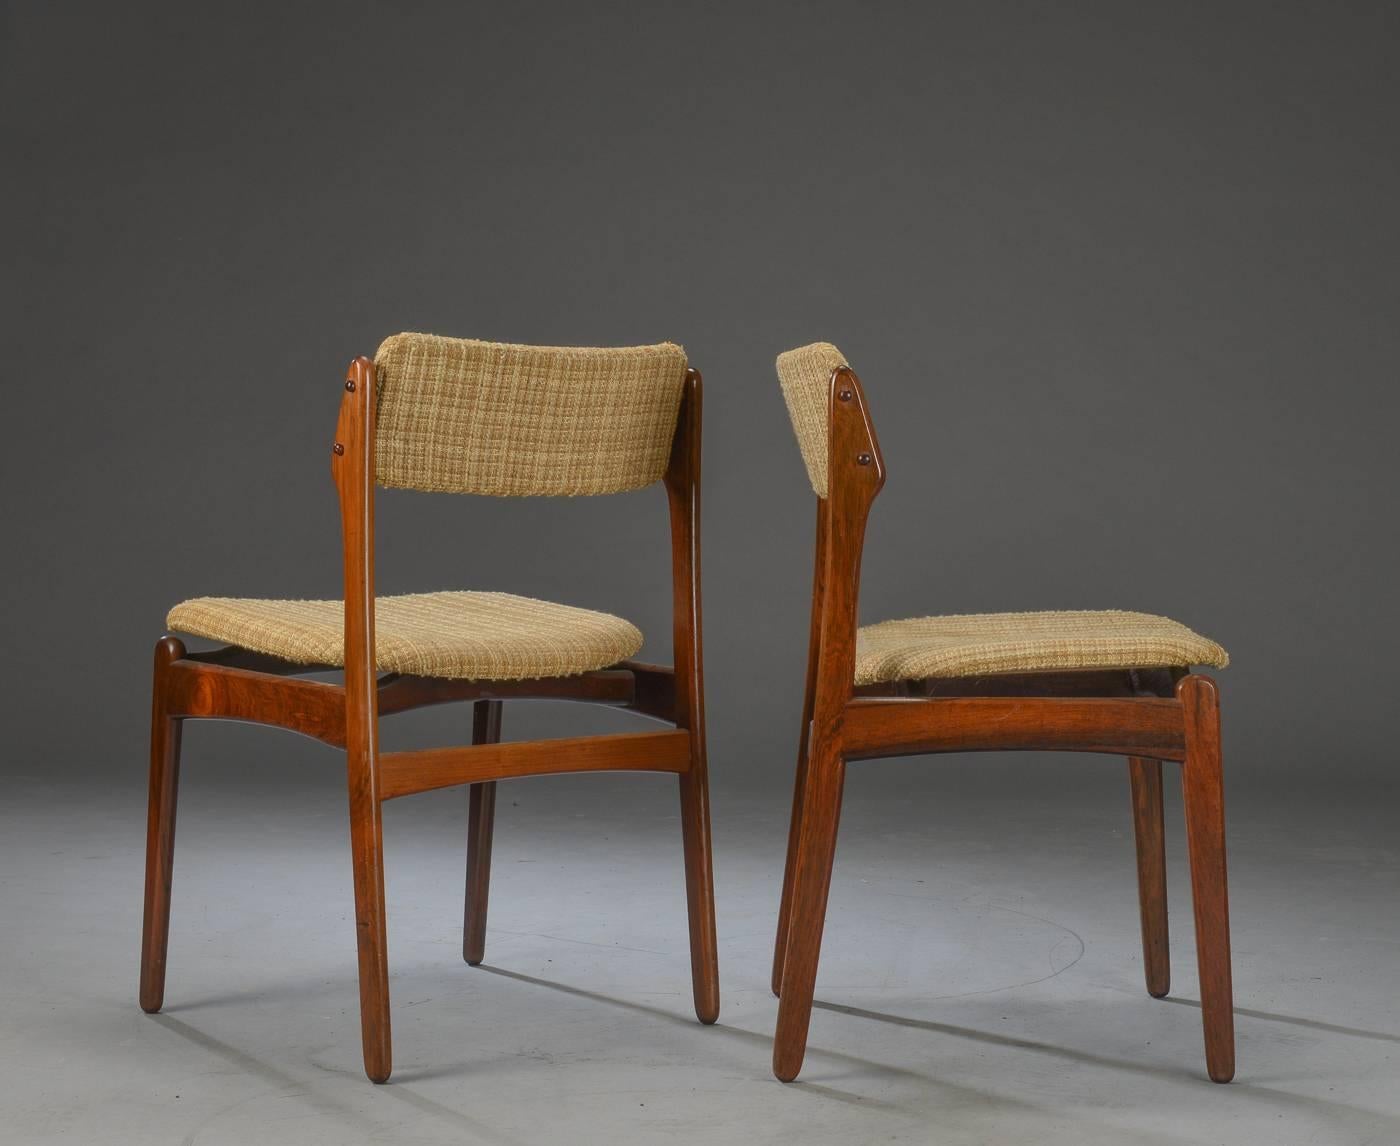 Set of six Danish dining chairs in rosewood veneer from the late 1970s, by Erik Buck model 49.
Padded seat and back. 
Price 